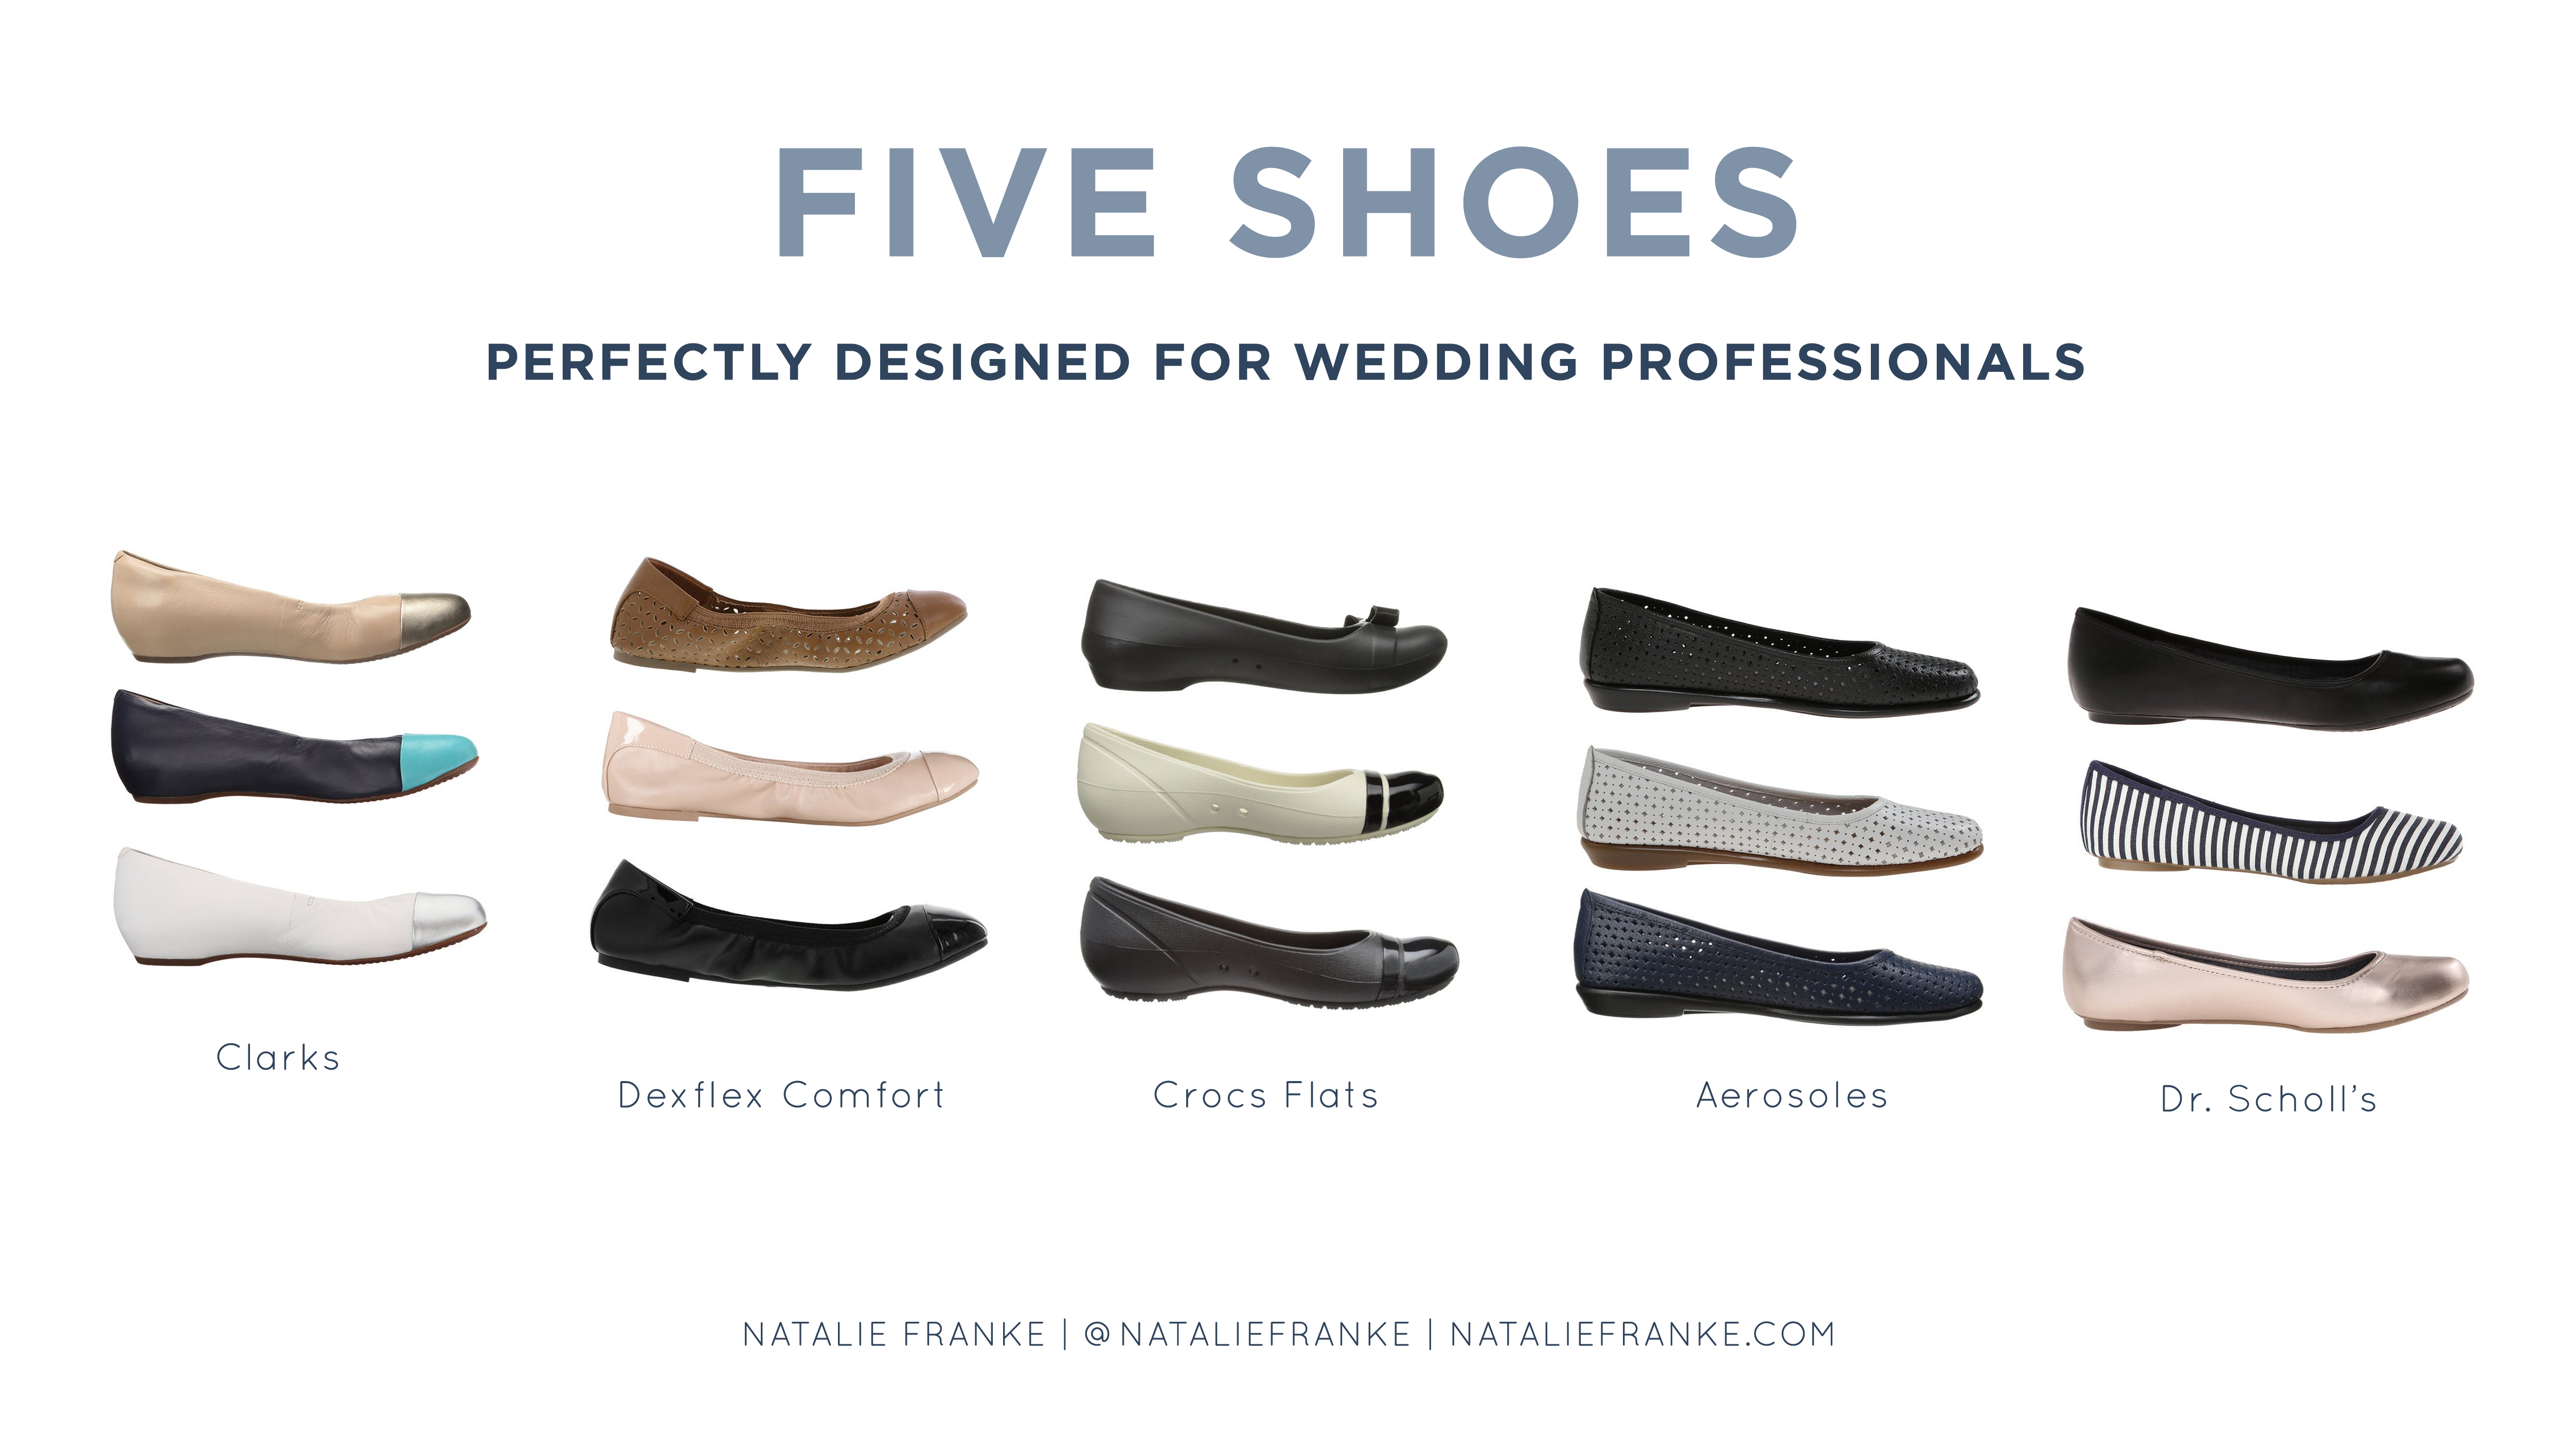 Five Shoes perfectly designed for Wedding Professionals, Planners, and Photographers!